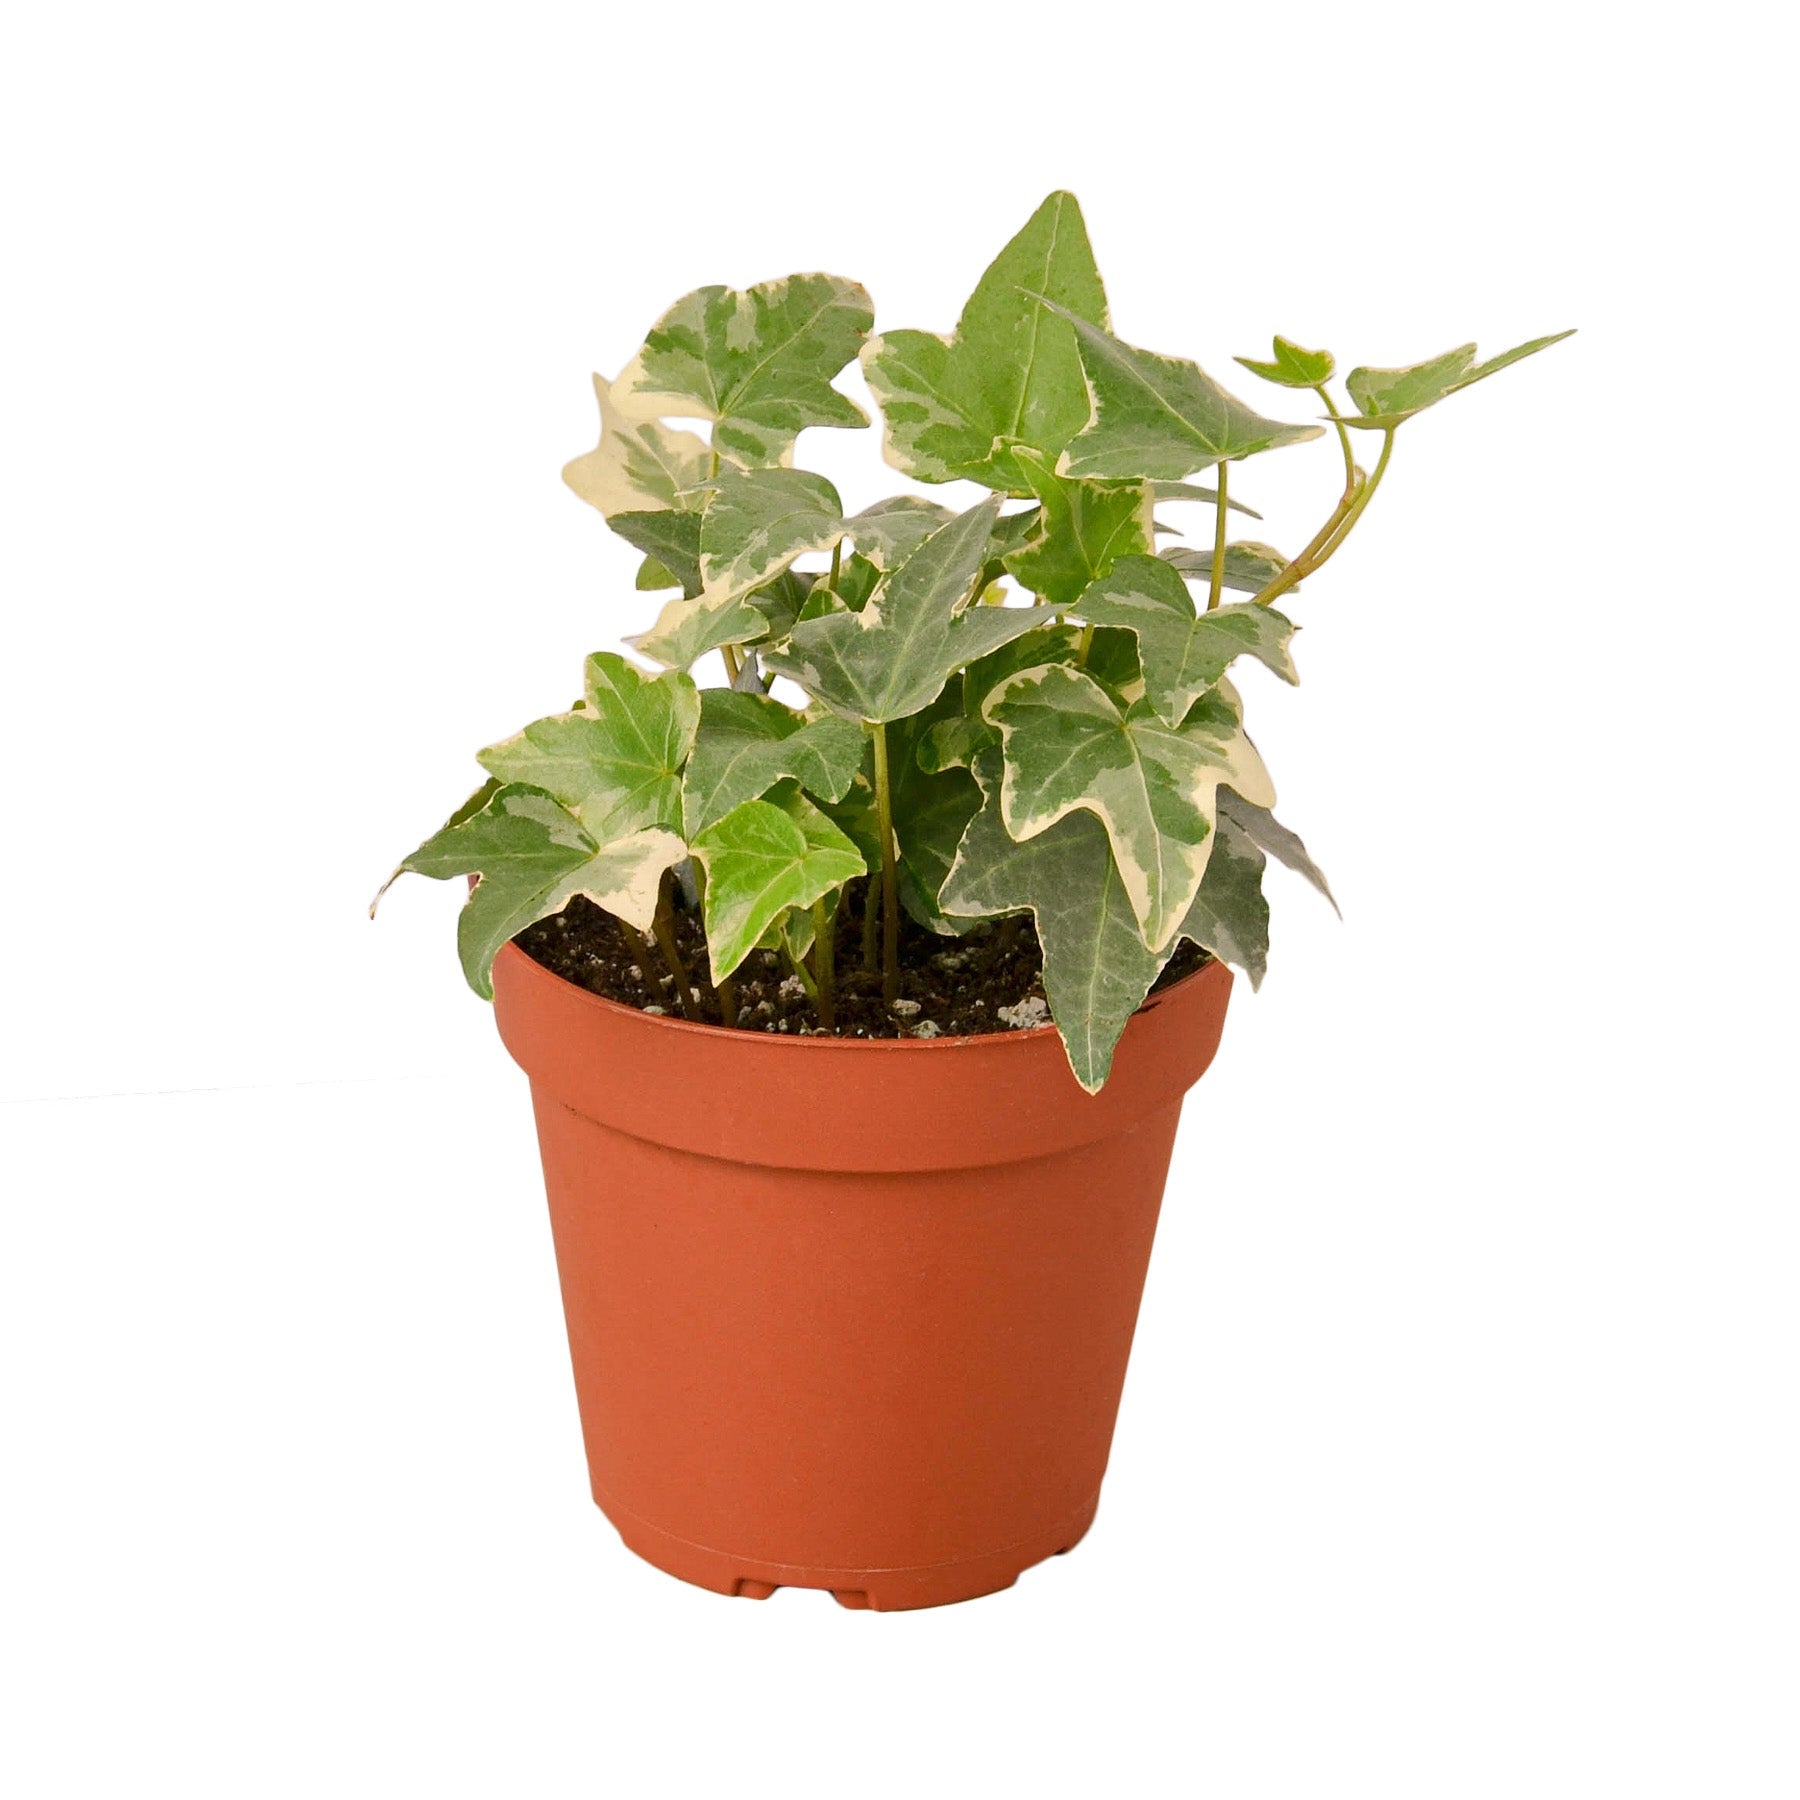 An ivy plant in a pot on a white background.